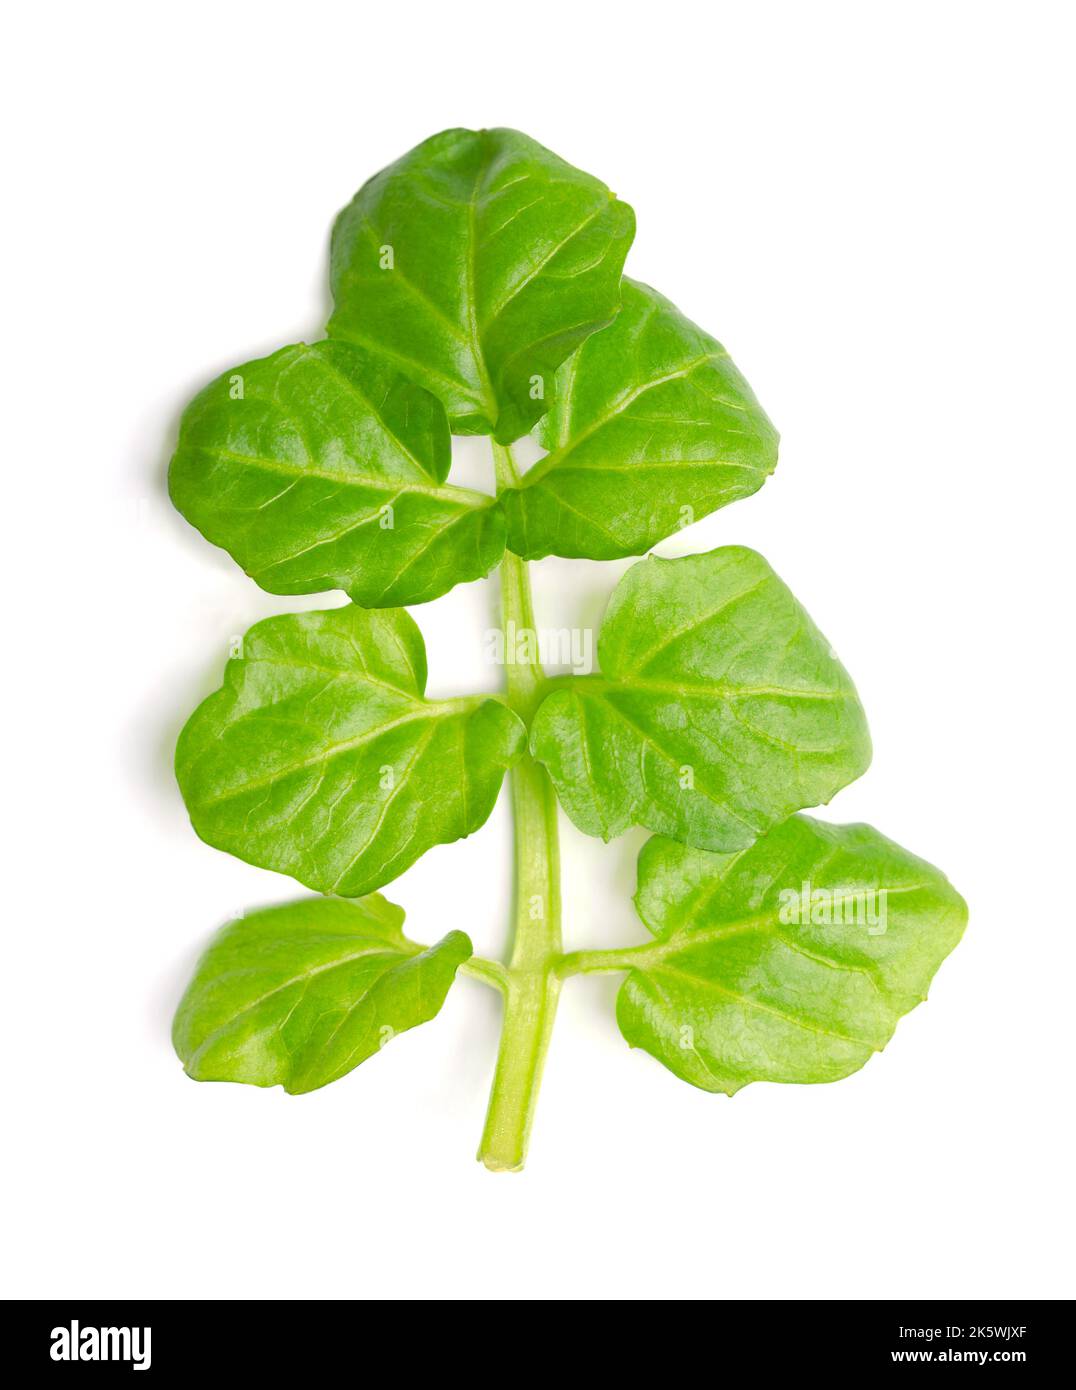 Watercress leaf, close up from above. Fresh, green, feather like frond of Nasturtium officinale, also known as yellowcress, with paripinnate divisions. Stock Photo